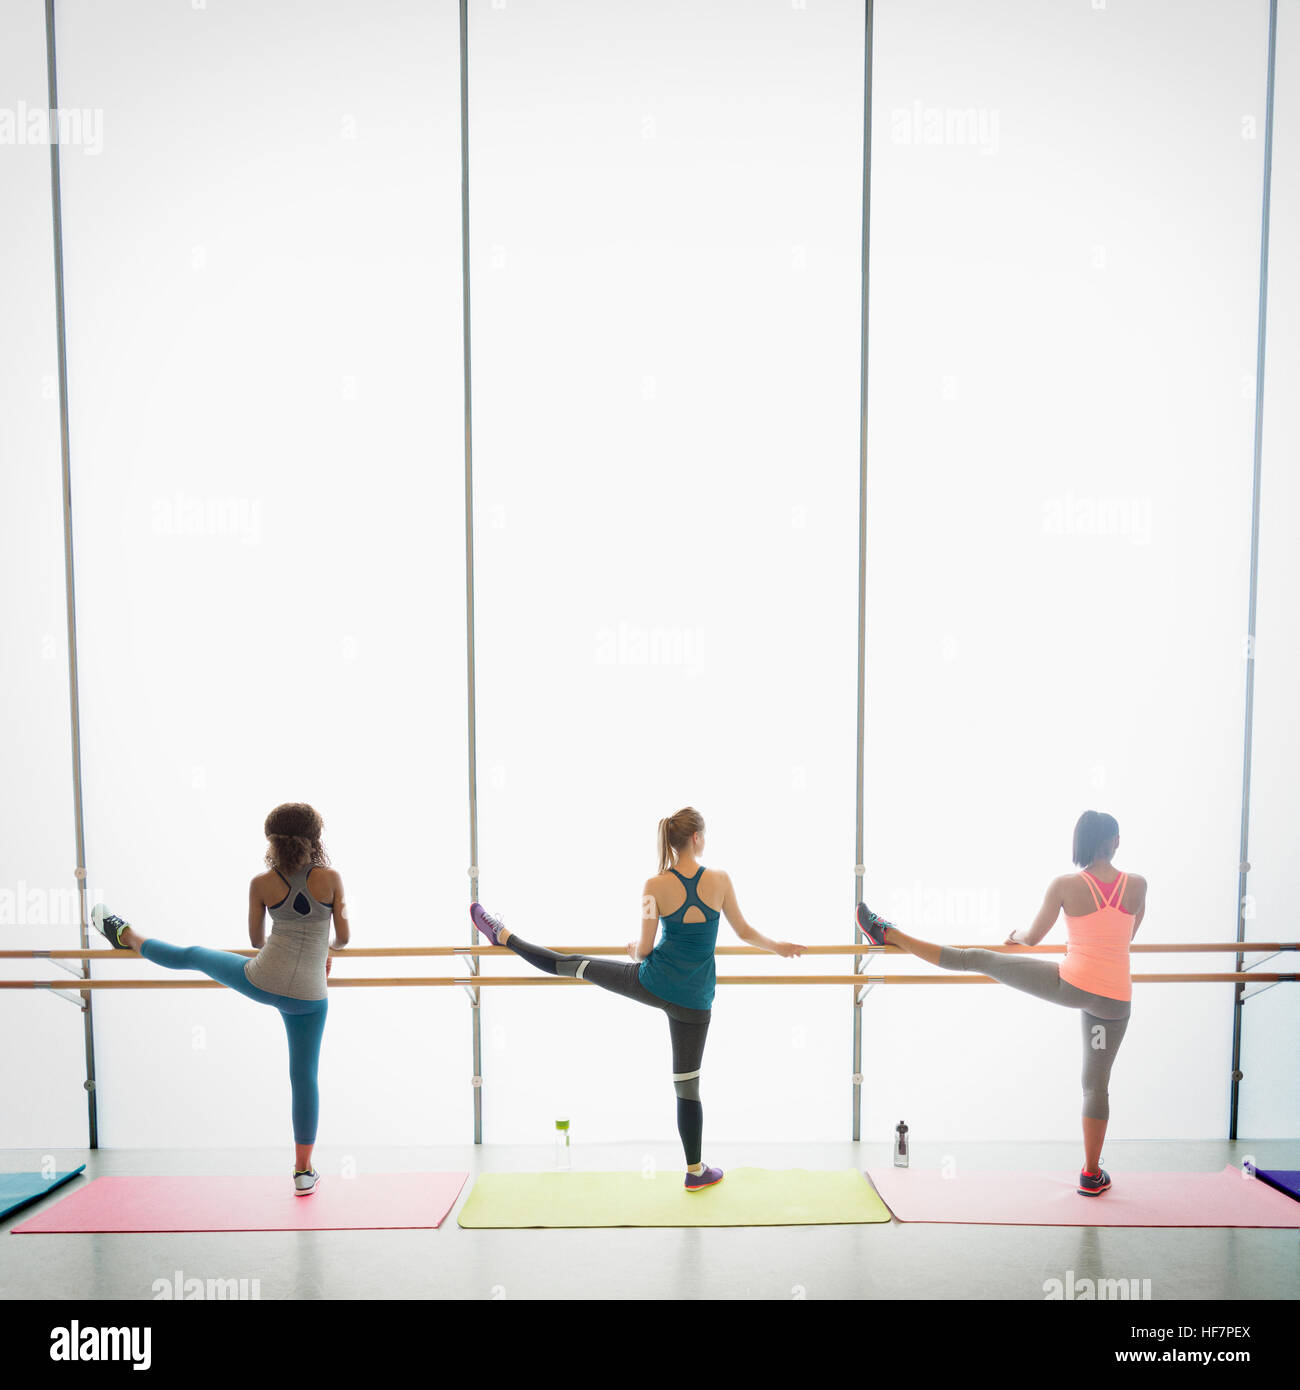 Women stretching legs at barre in exercise class gym studio Stock Photo